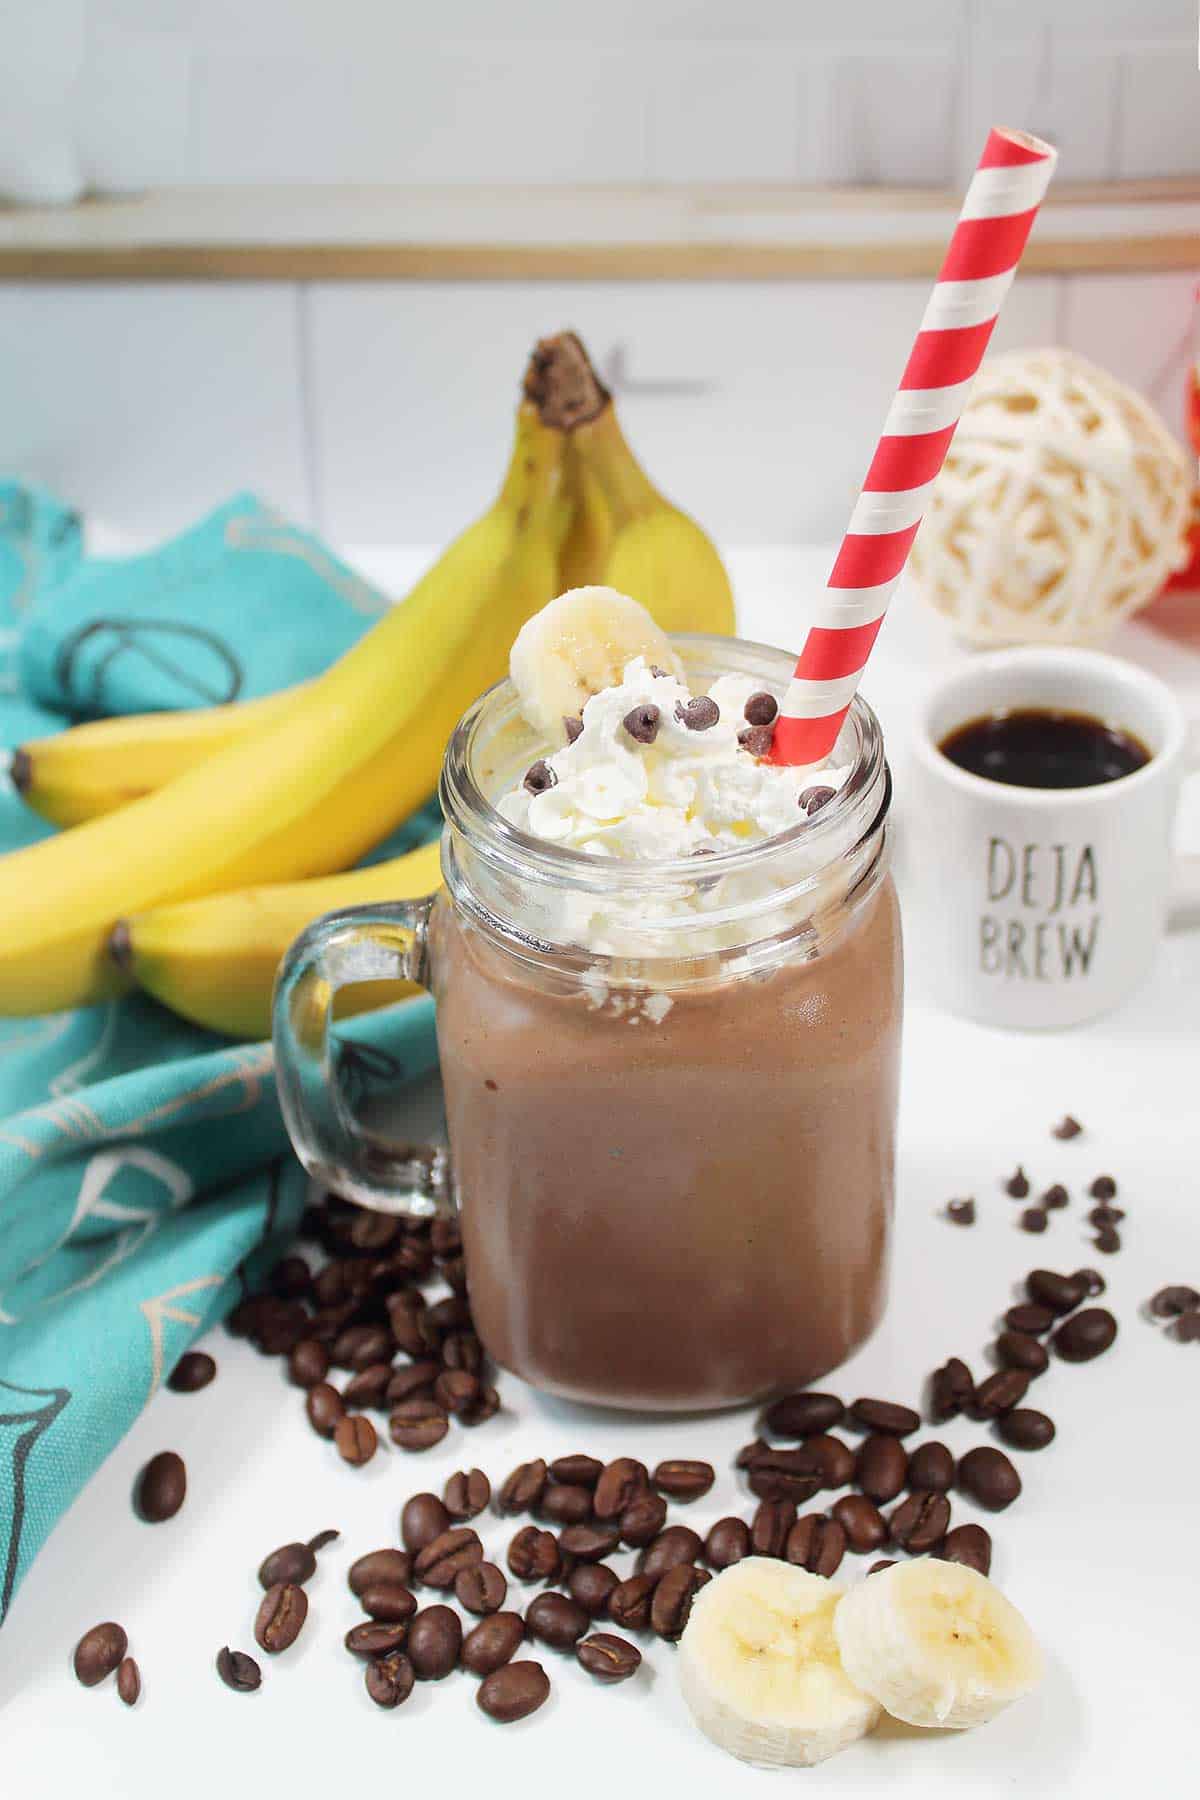 Coffee smoothie with whipped cream topping by bananas.